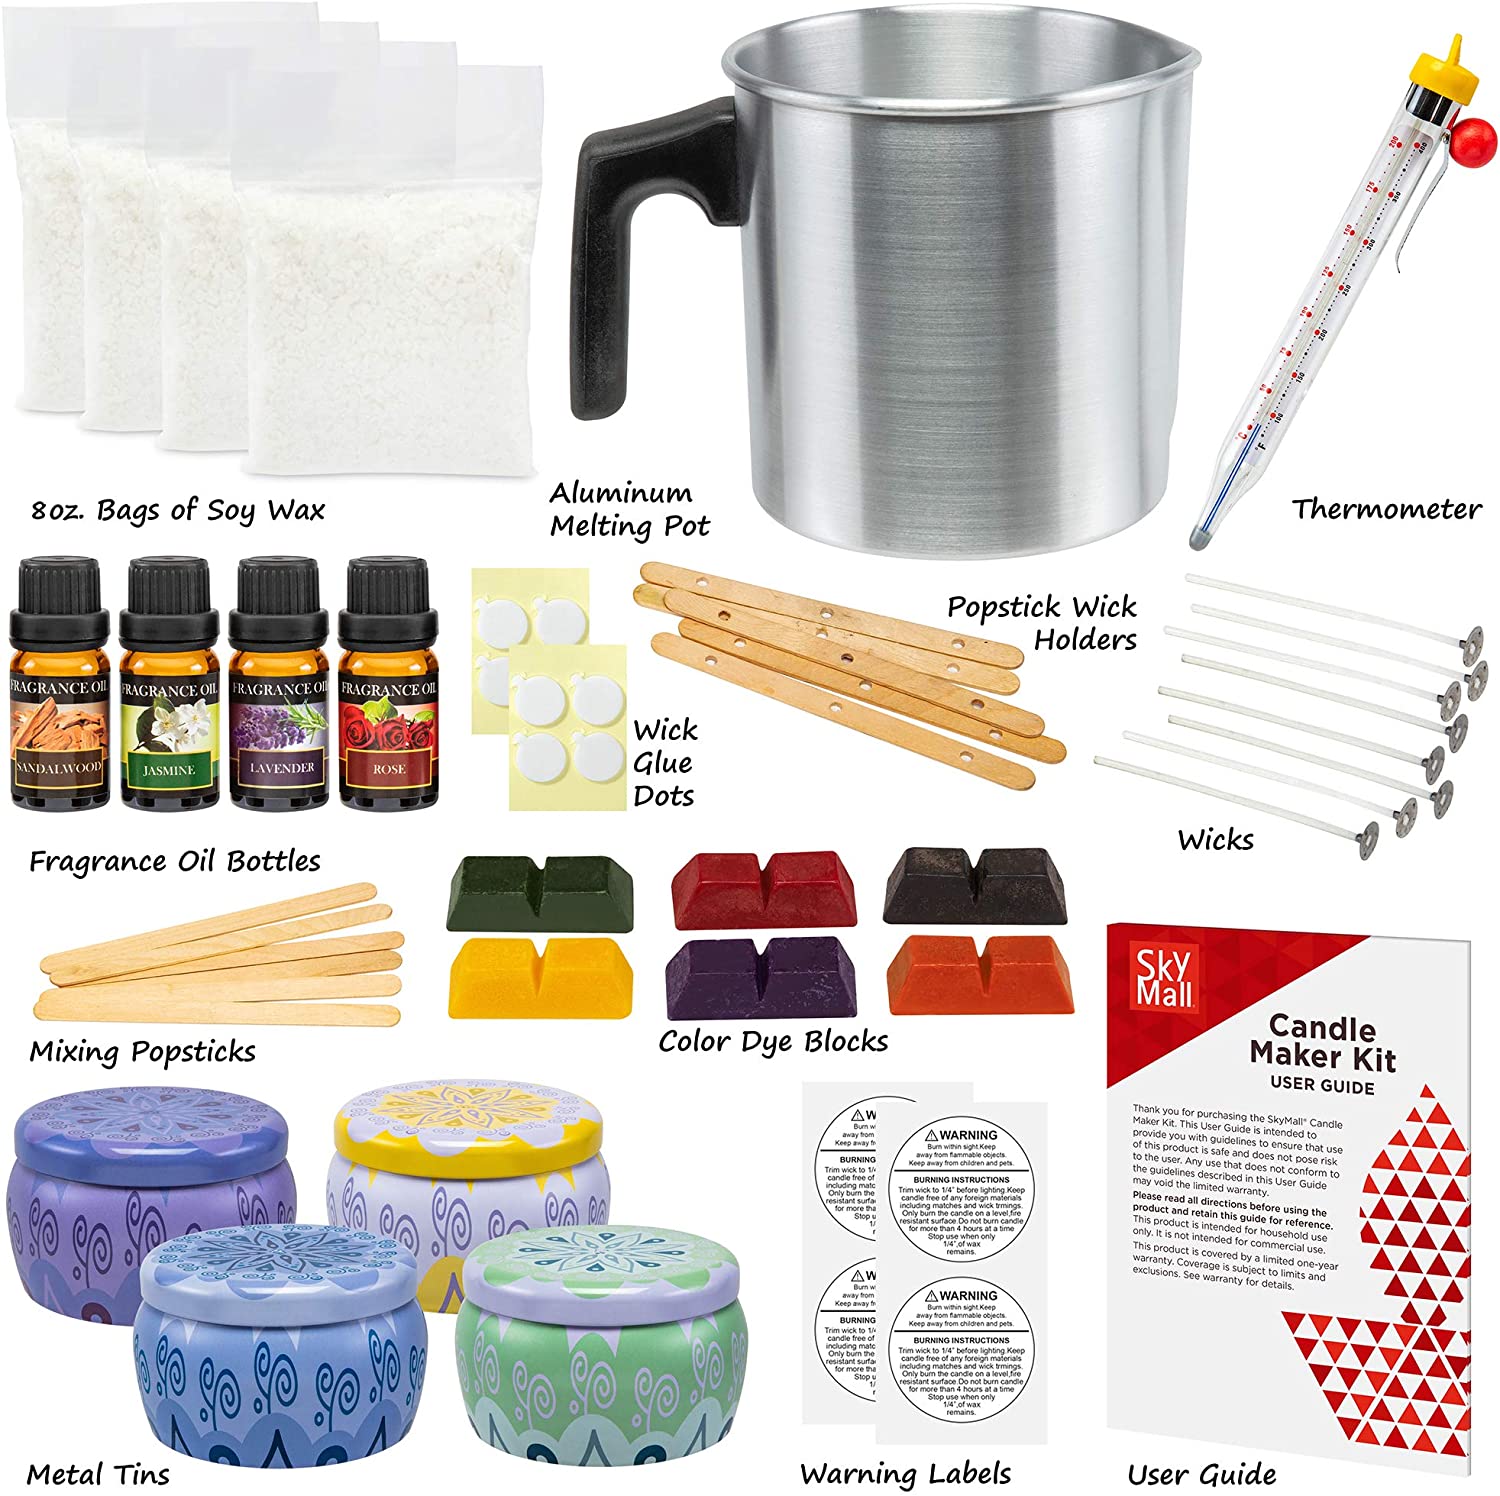 SkyMall Candle Making Kit, DIY Set for Making Candles with Melting Pot, 4  Large Metal Tins, [4] 8oz Soy Wax Bags, 6 Color Dye Blocks, 4 Fragrance